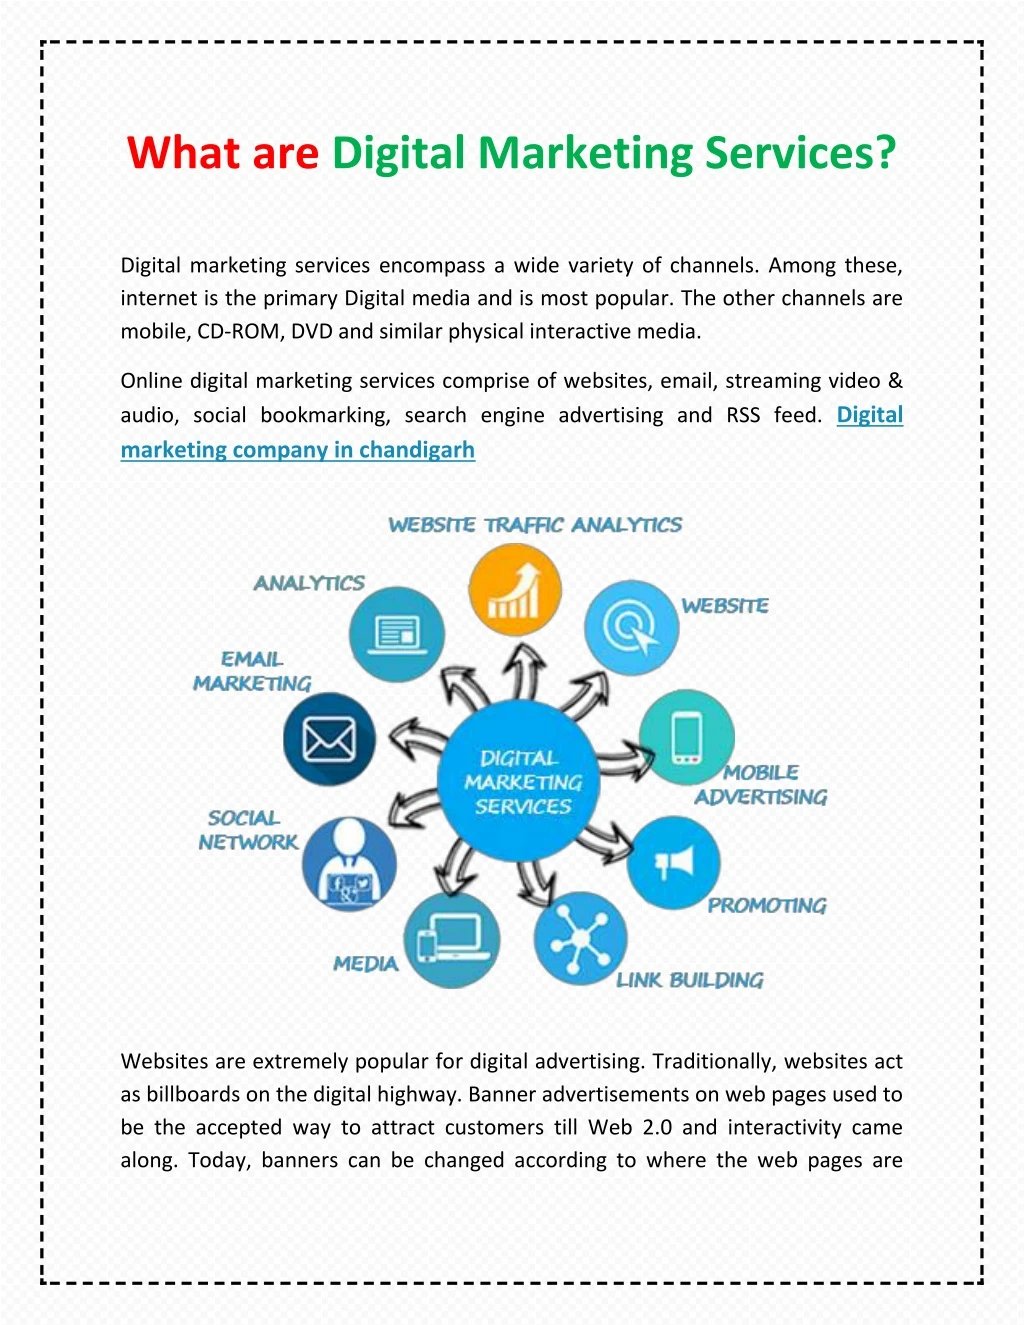 what are digital marketing services